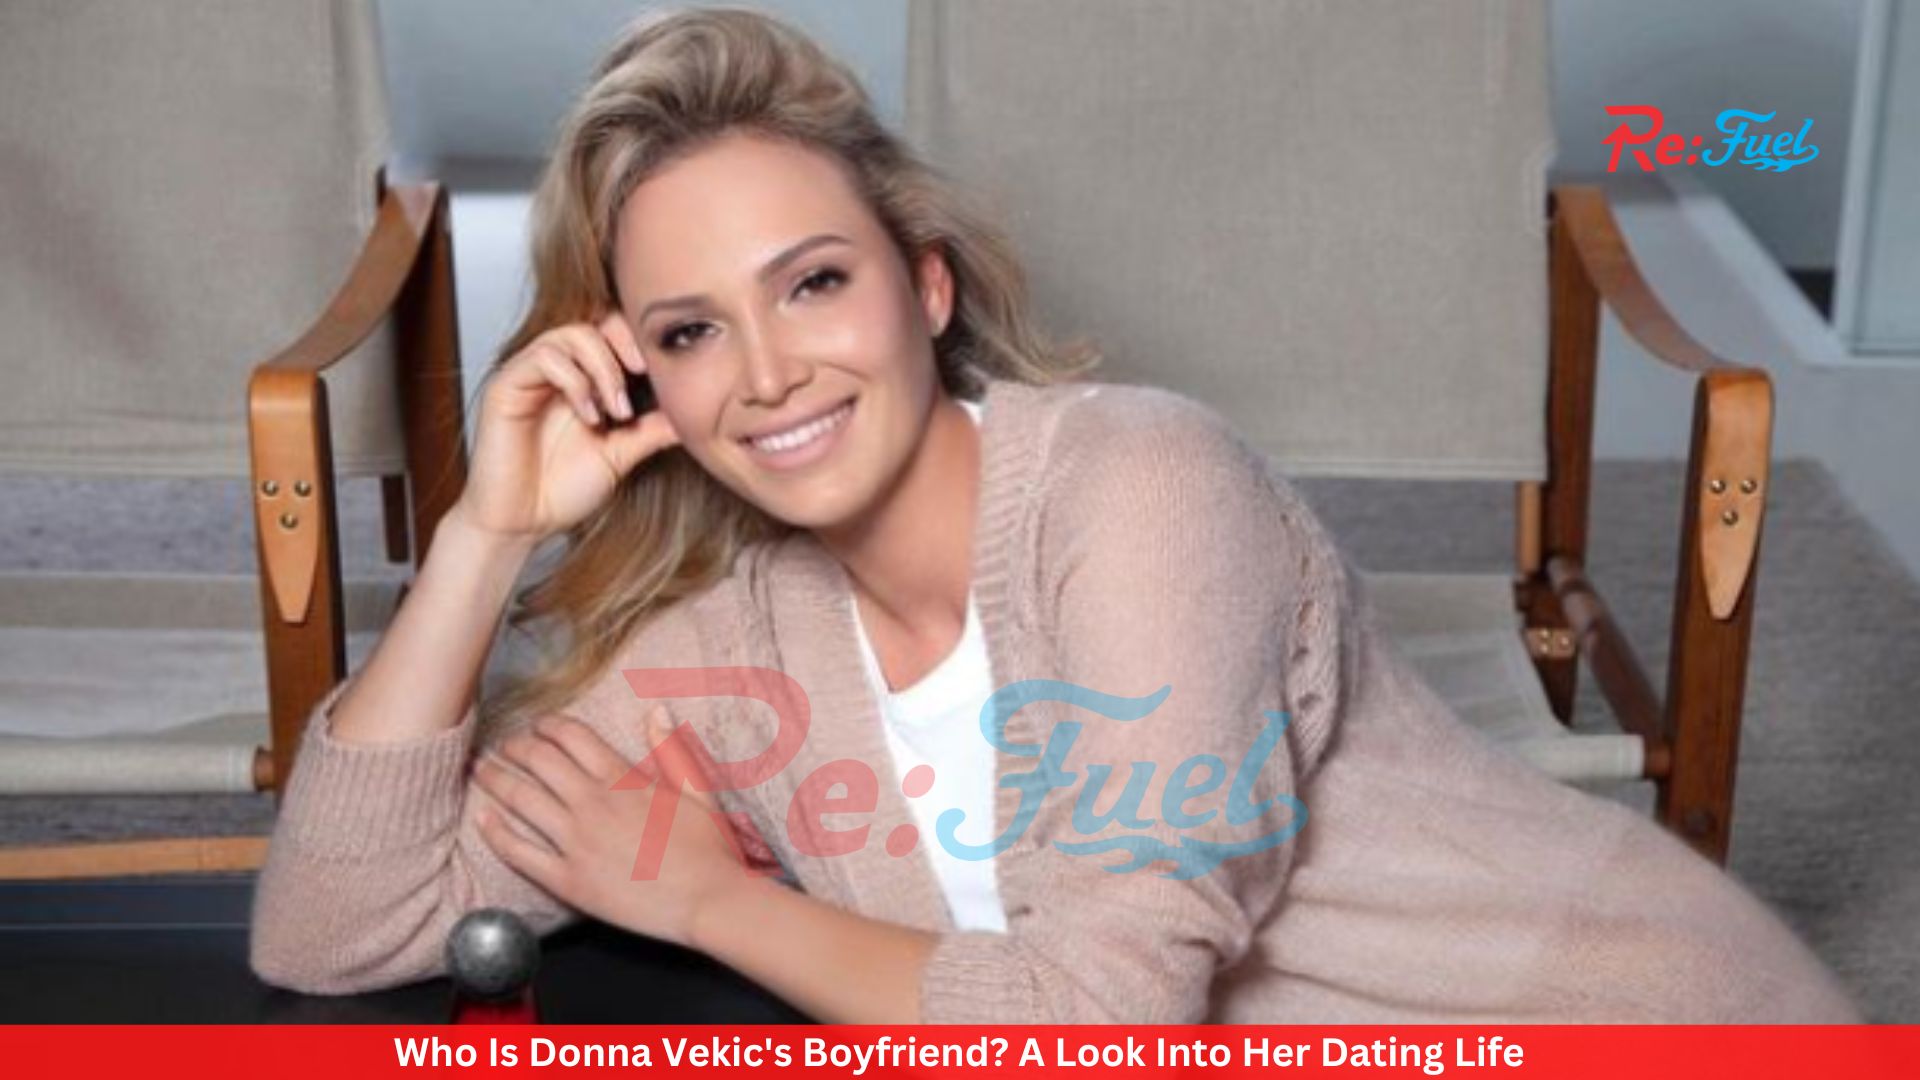 Who Is Donna Vekic's Boyfriend? A Look Into Her Dating Life